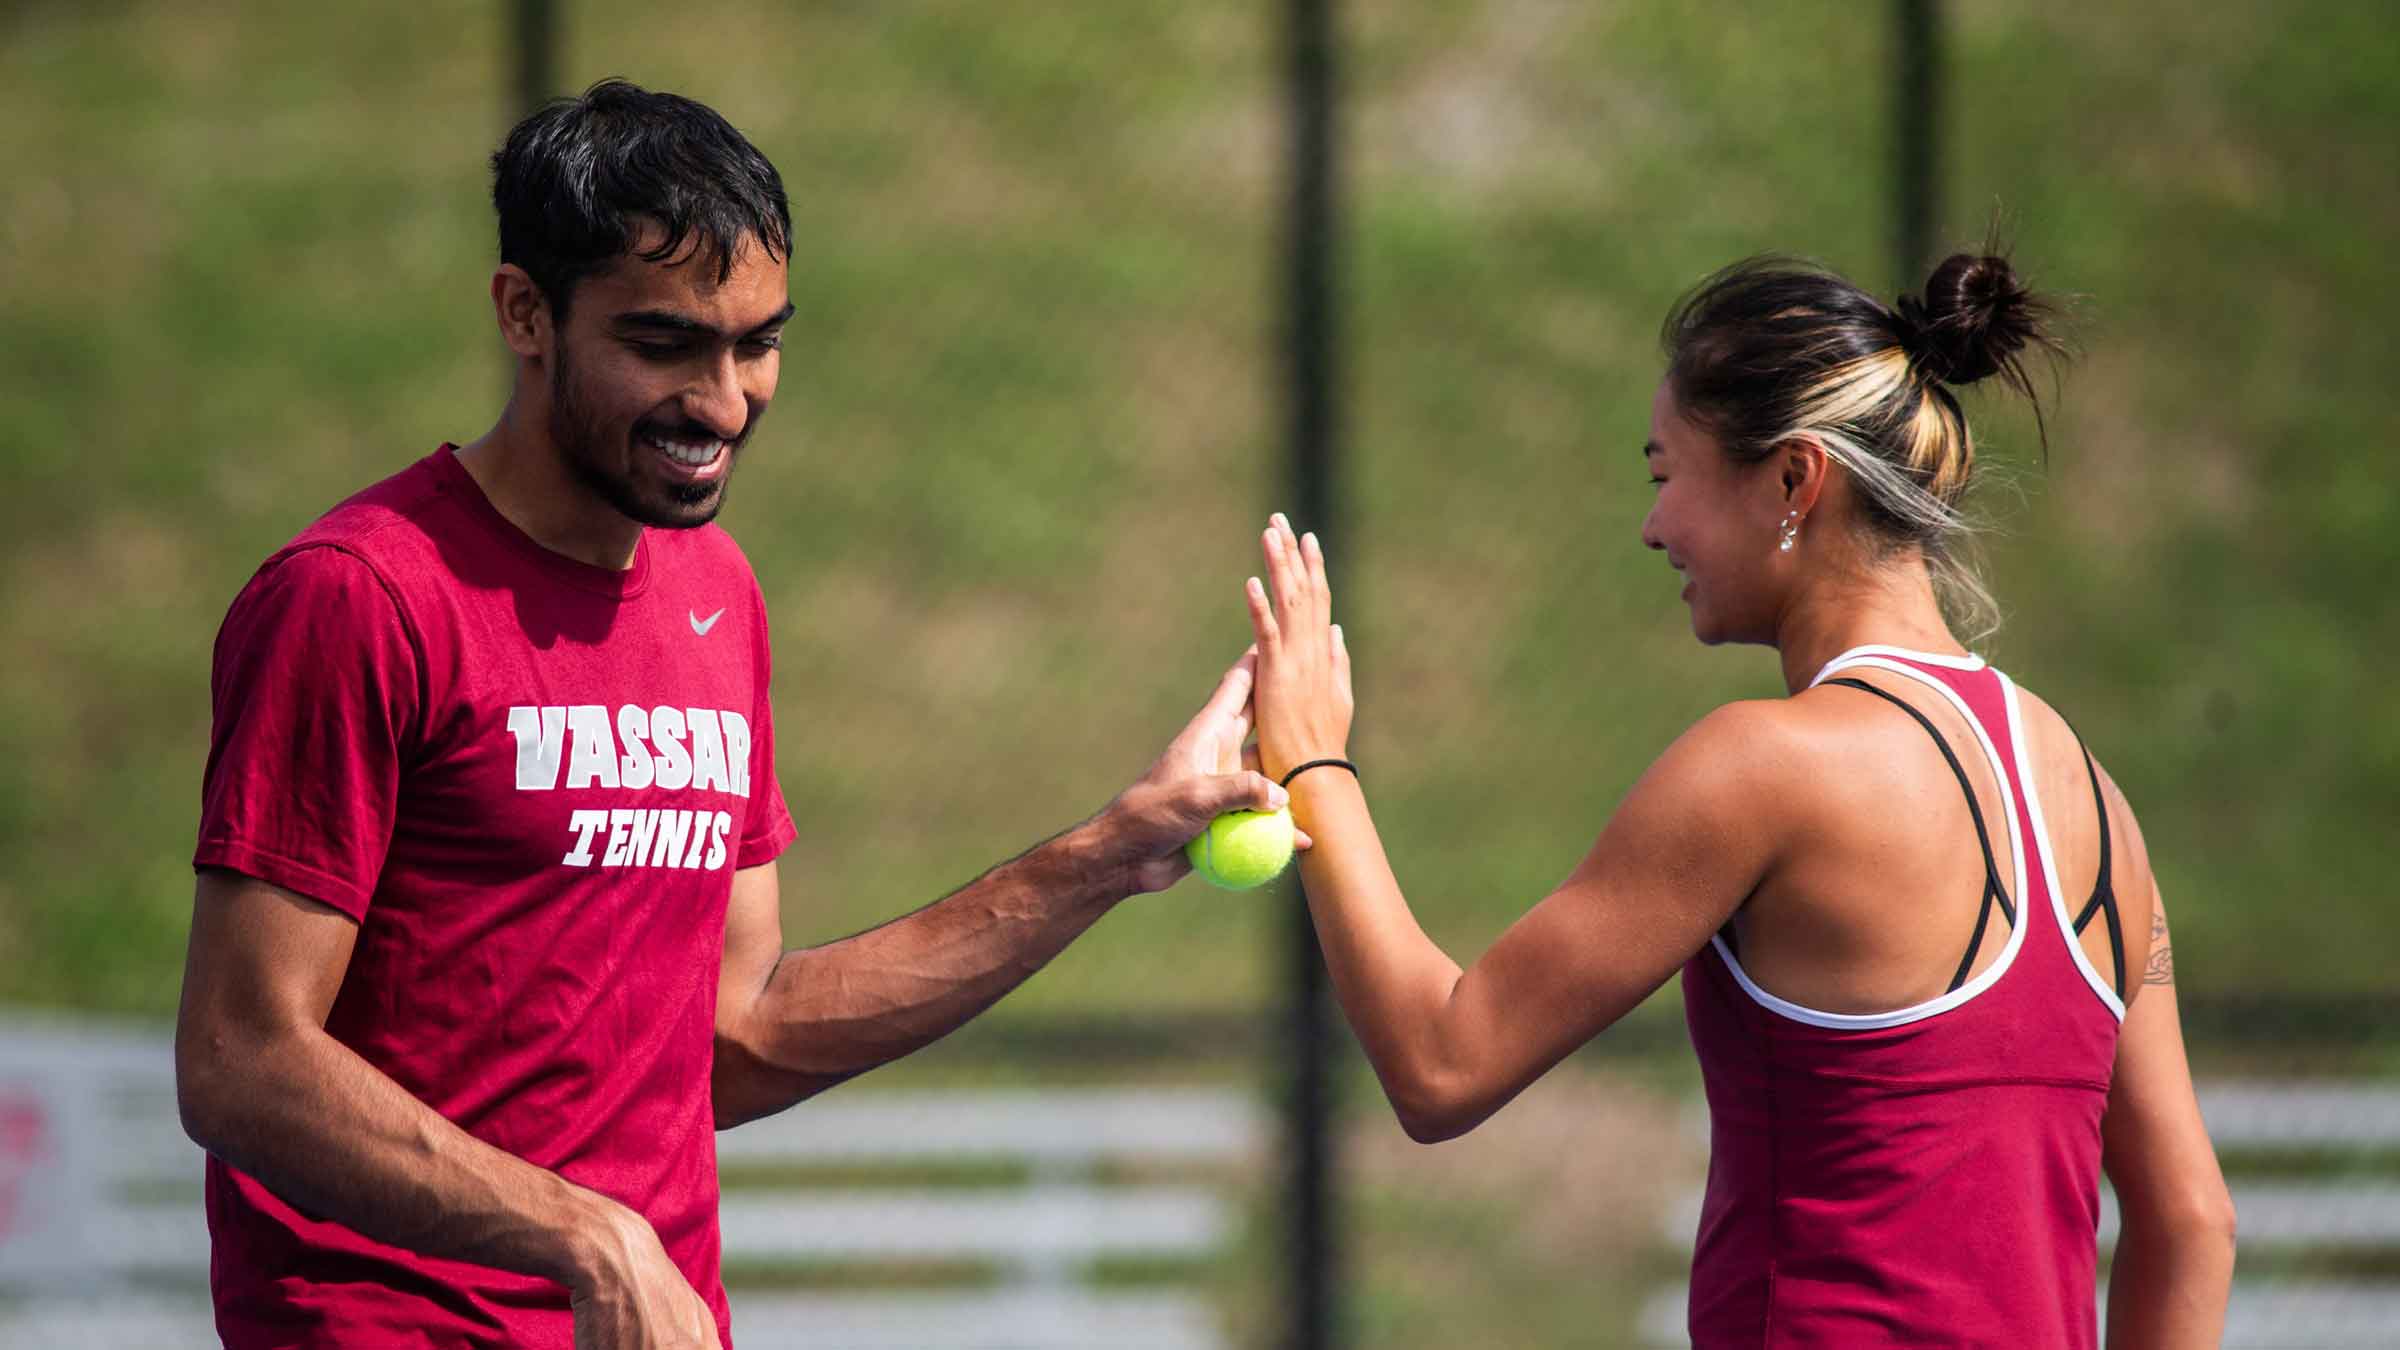 two people in tennis gear, one holding a ball, giving each other a high five